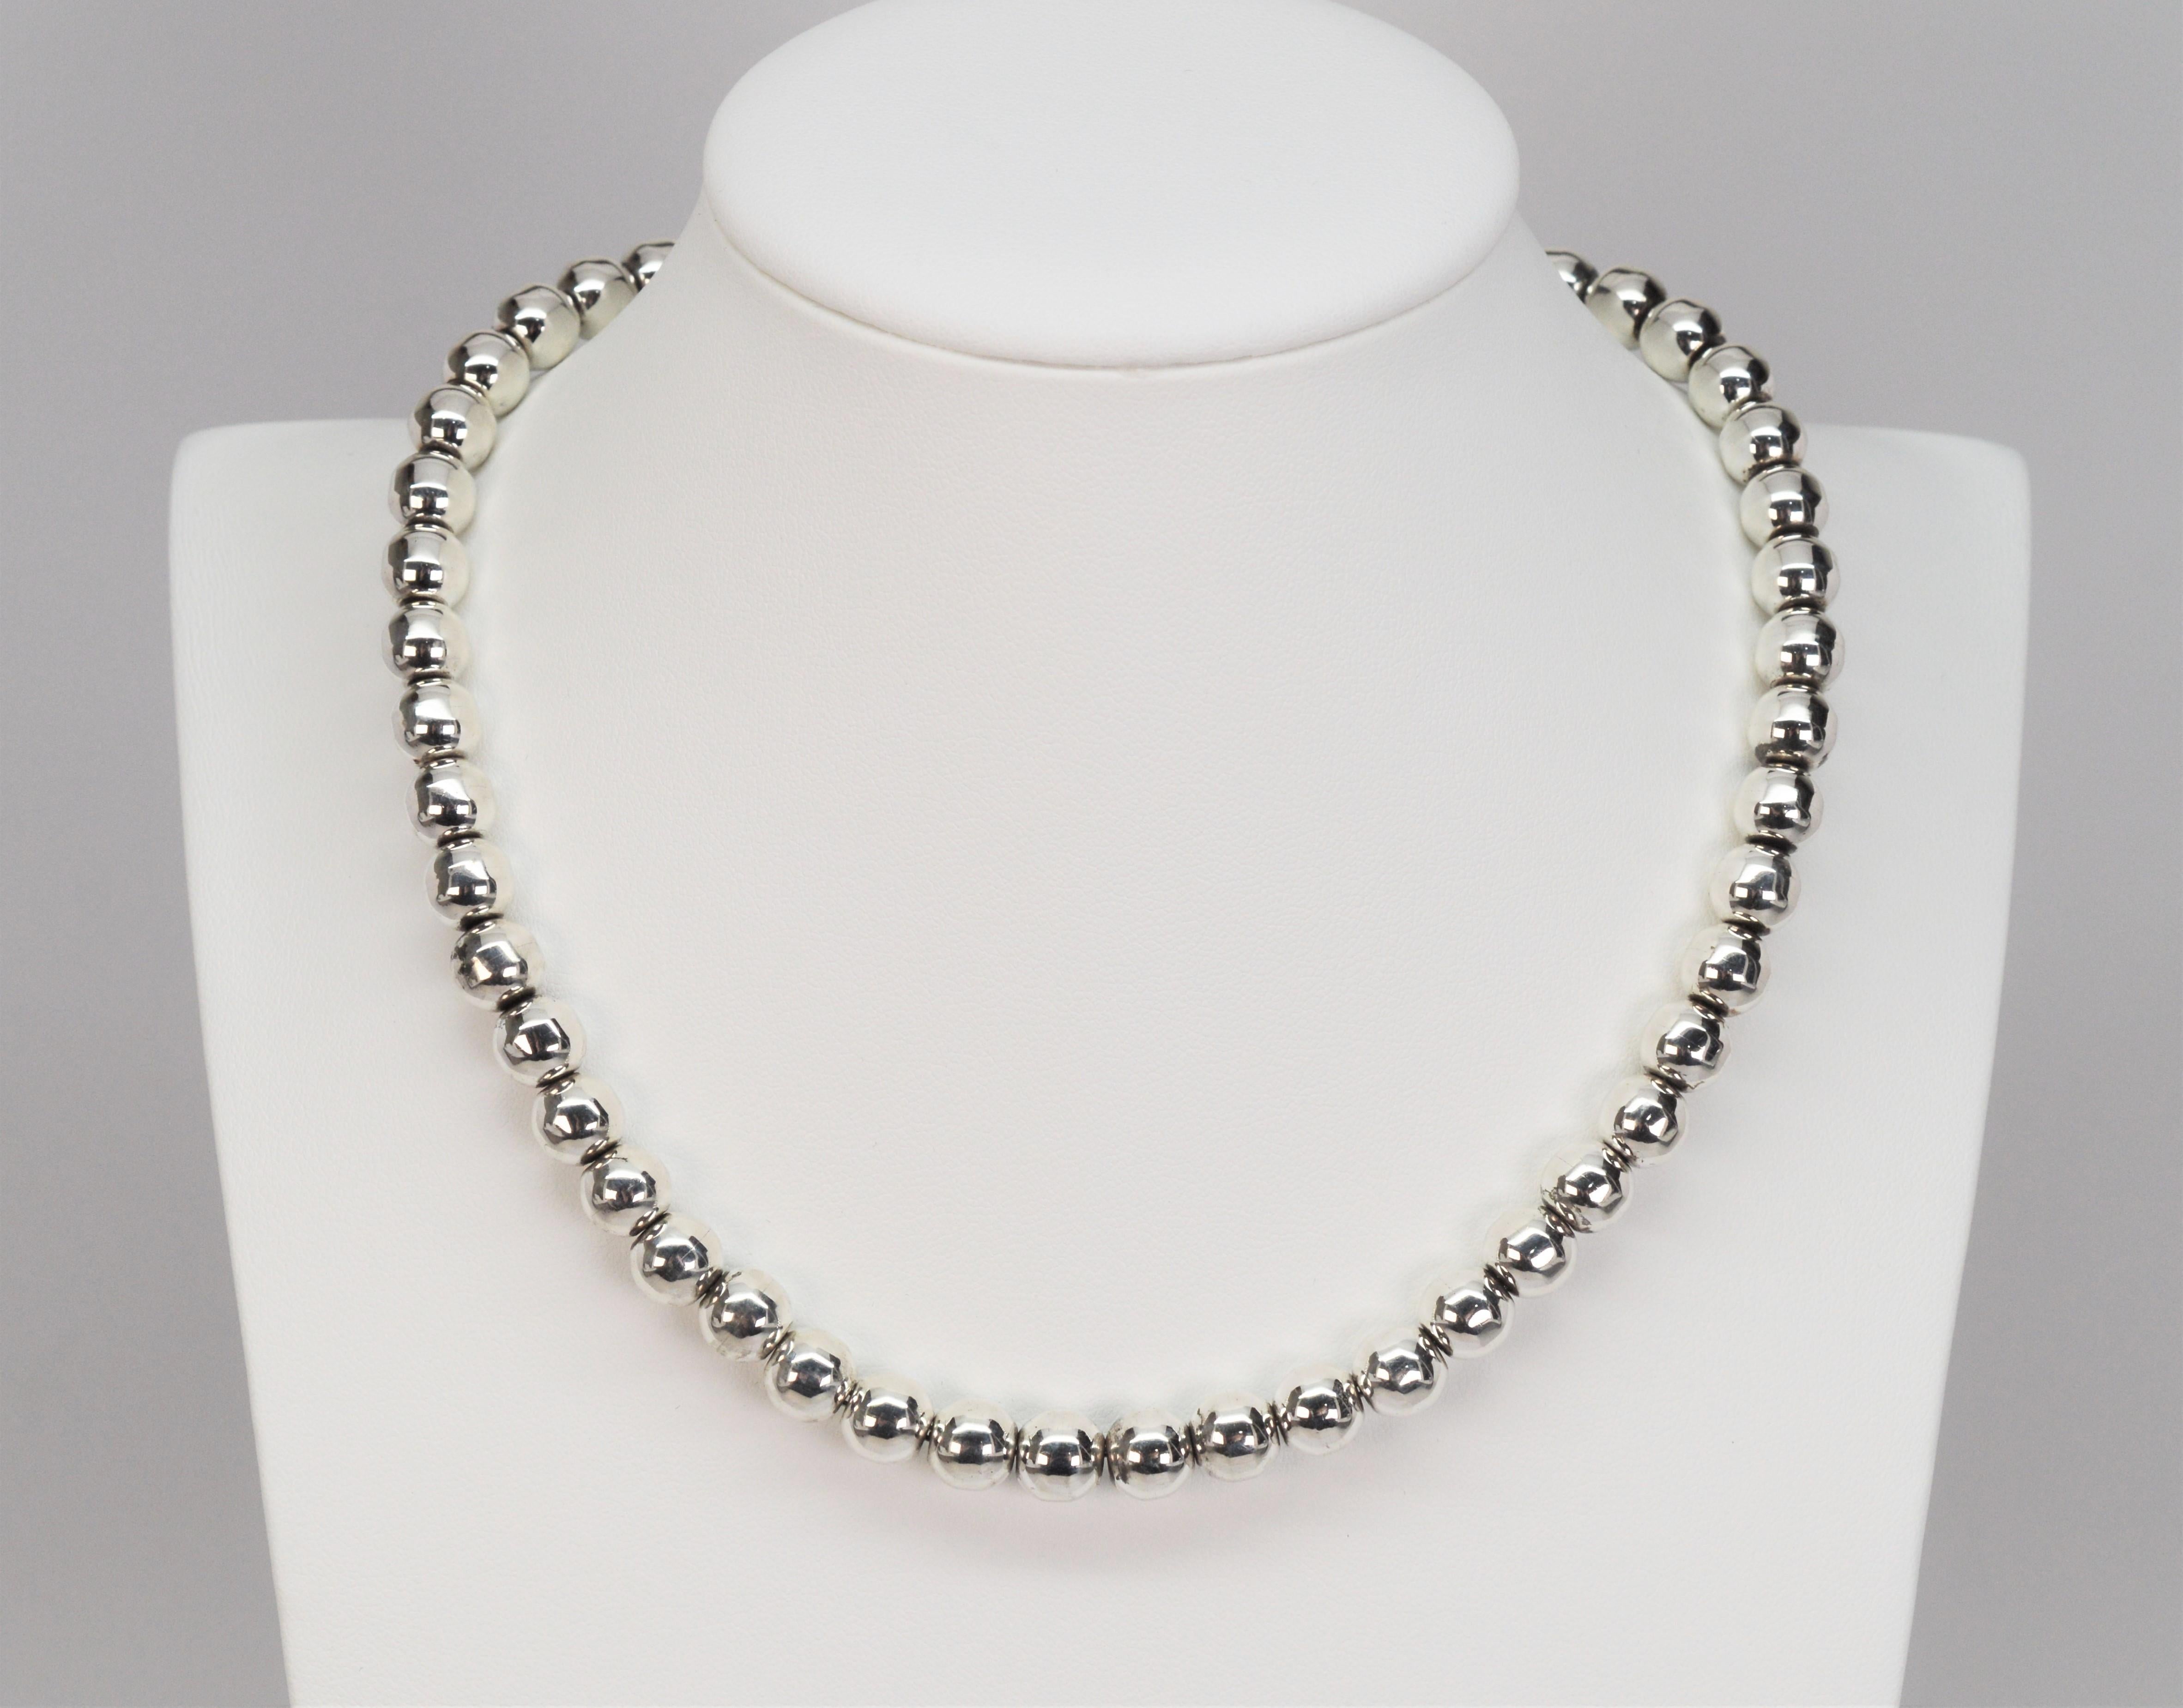 Add this classic silver beaded strand as a staple piece to brighten up your jewelry wardrobe. This versatile 16 inch necklace, great for casual wear or dress, is made fifty 7.5 mm polished .925 sterling silver beads and finished with a locking box